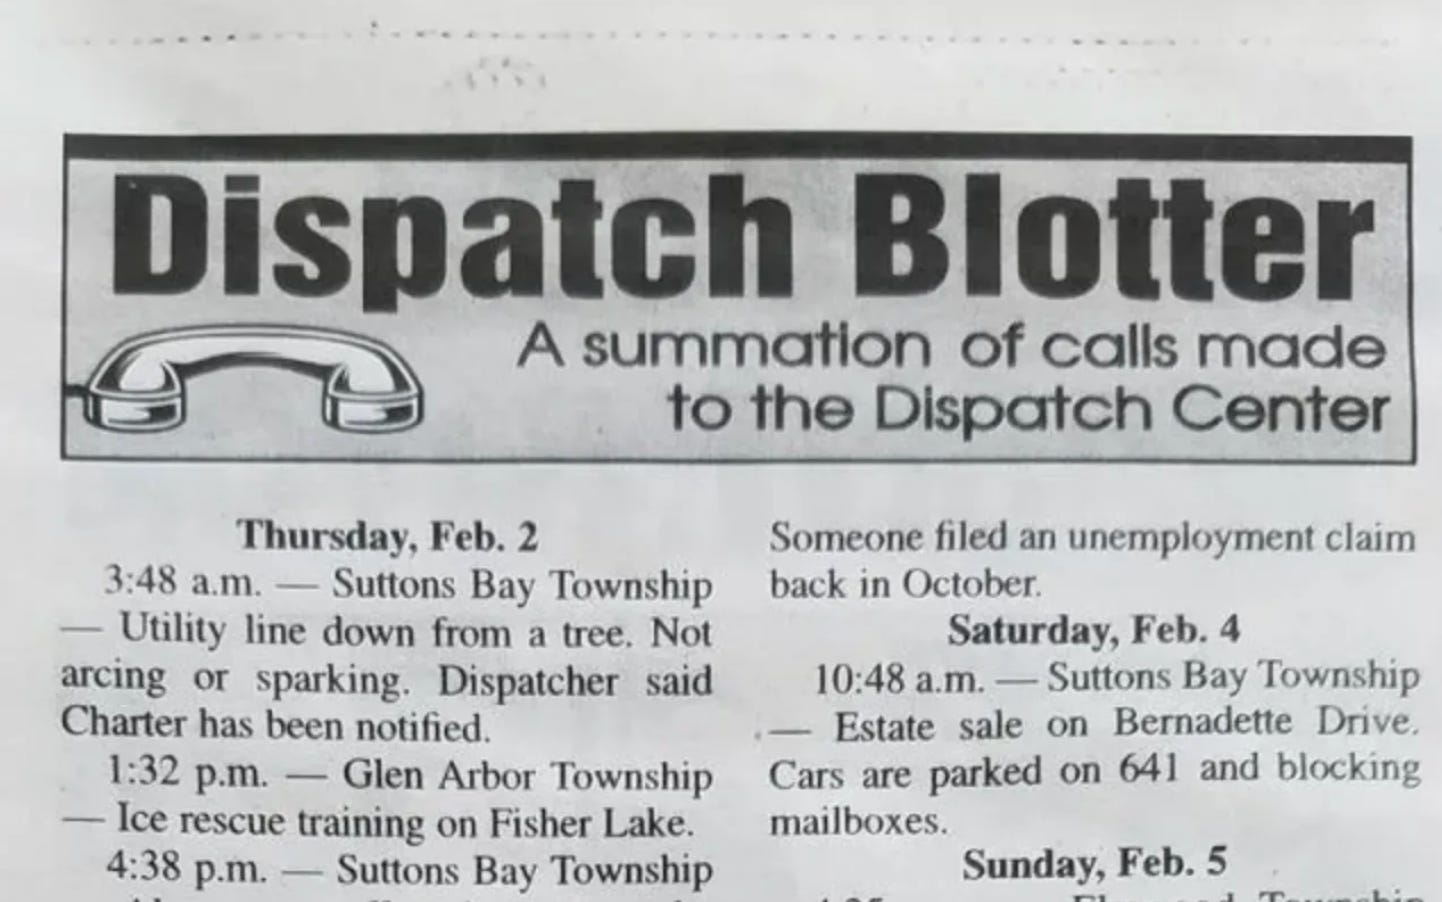 Image of a newspaper article titled "Dispatch Blotter"